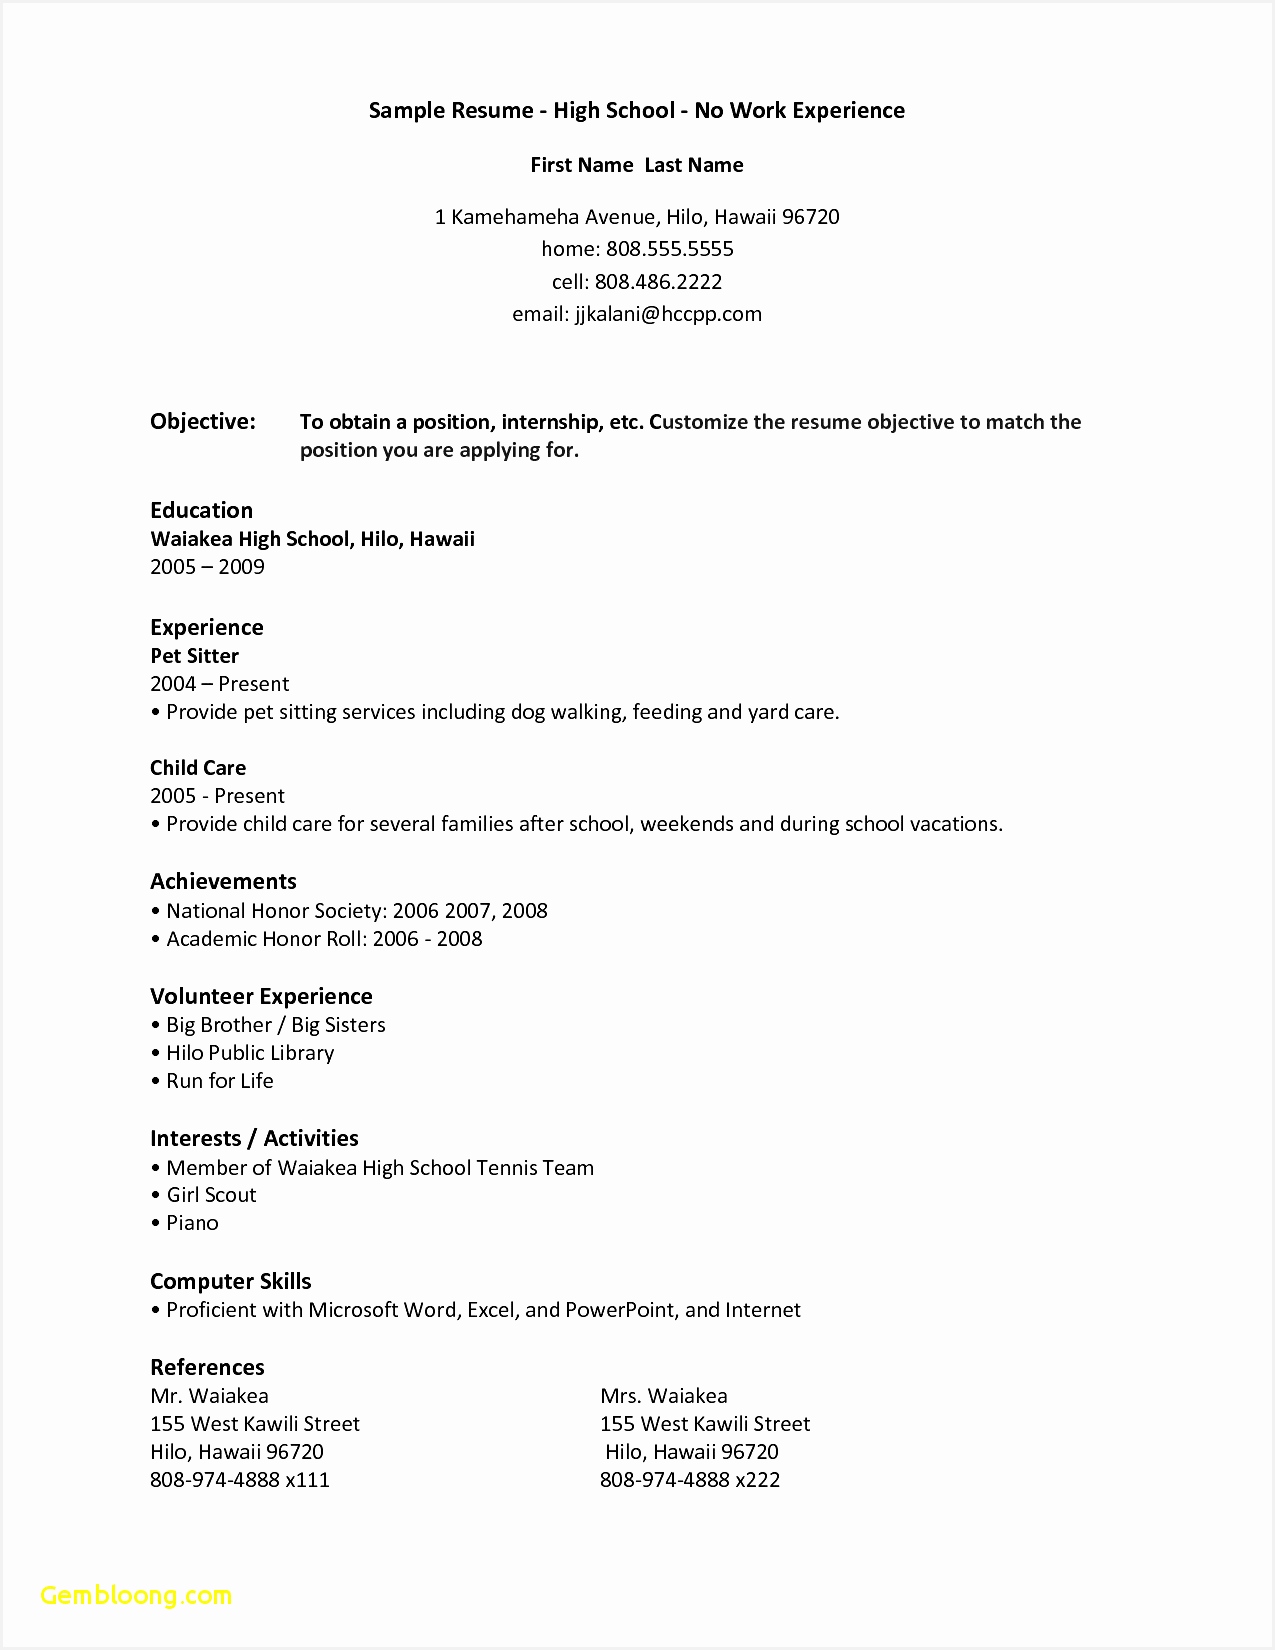 Resume format for No Work Experience Download now High School Student Resume Example Resume Template Builder16501275